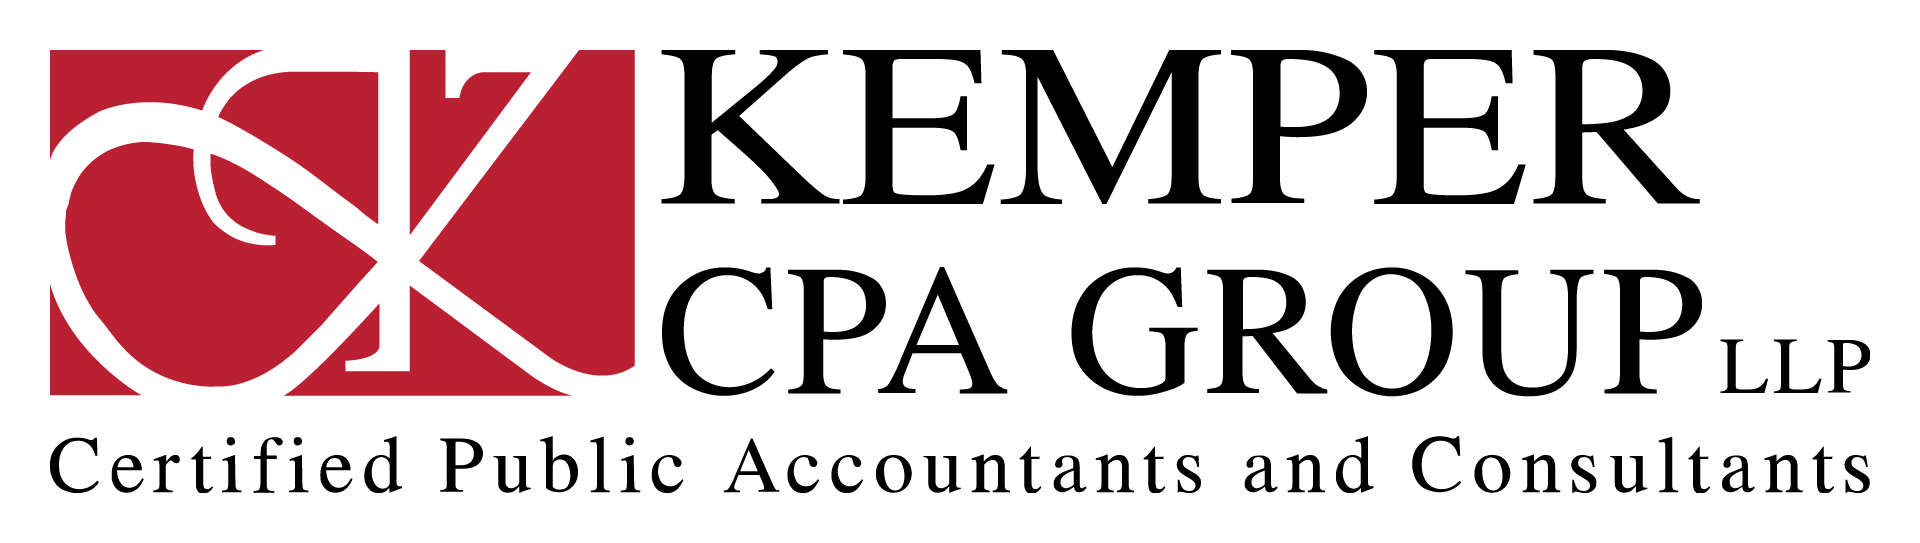 Kemper CPA Group LLP - Accounting & Tax Services